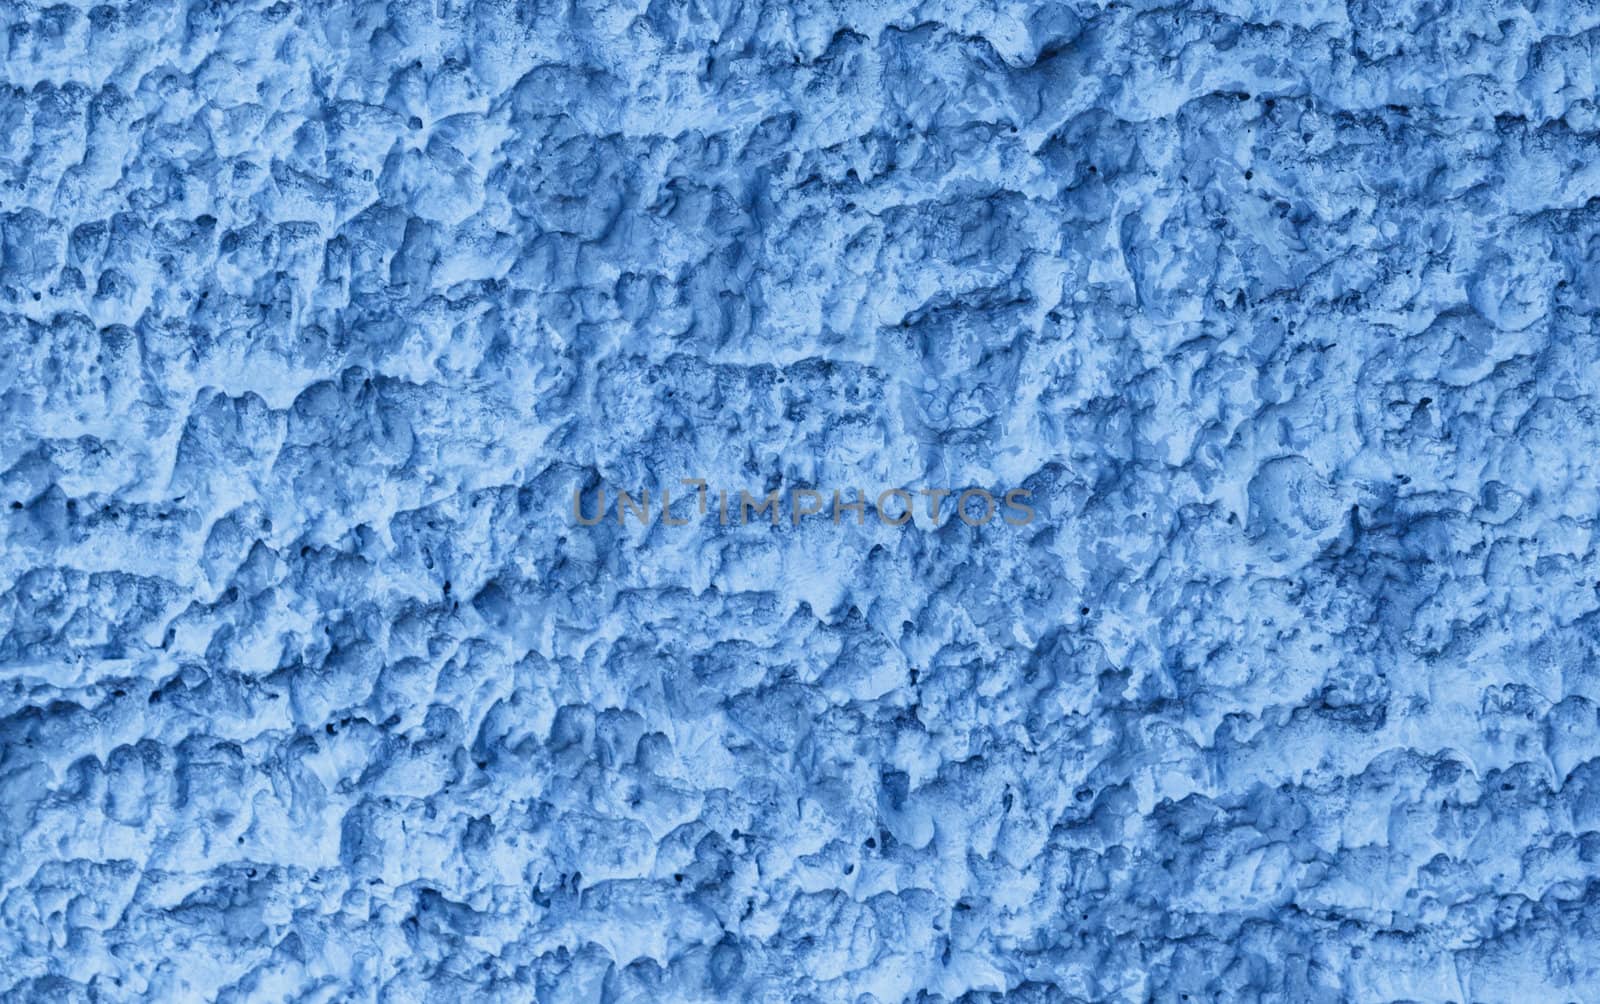 Texture on concrete wall in blue color by punpleng